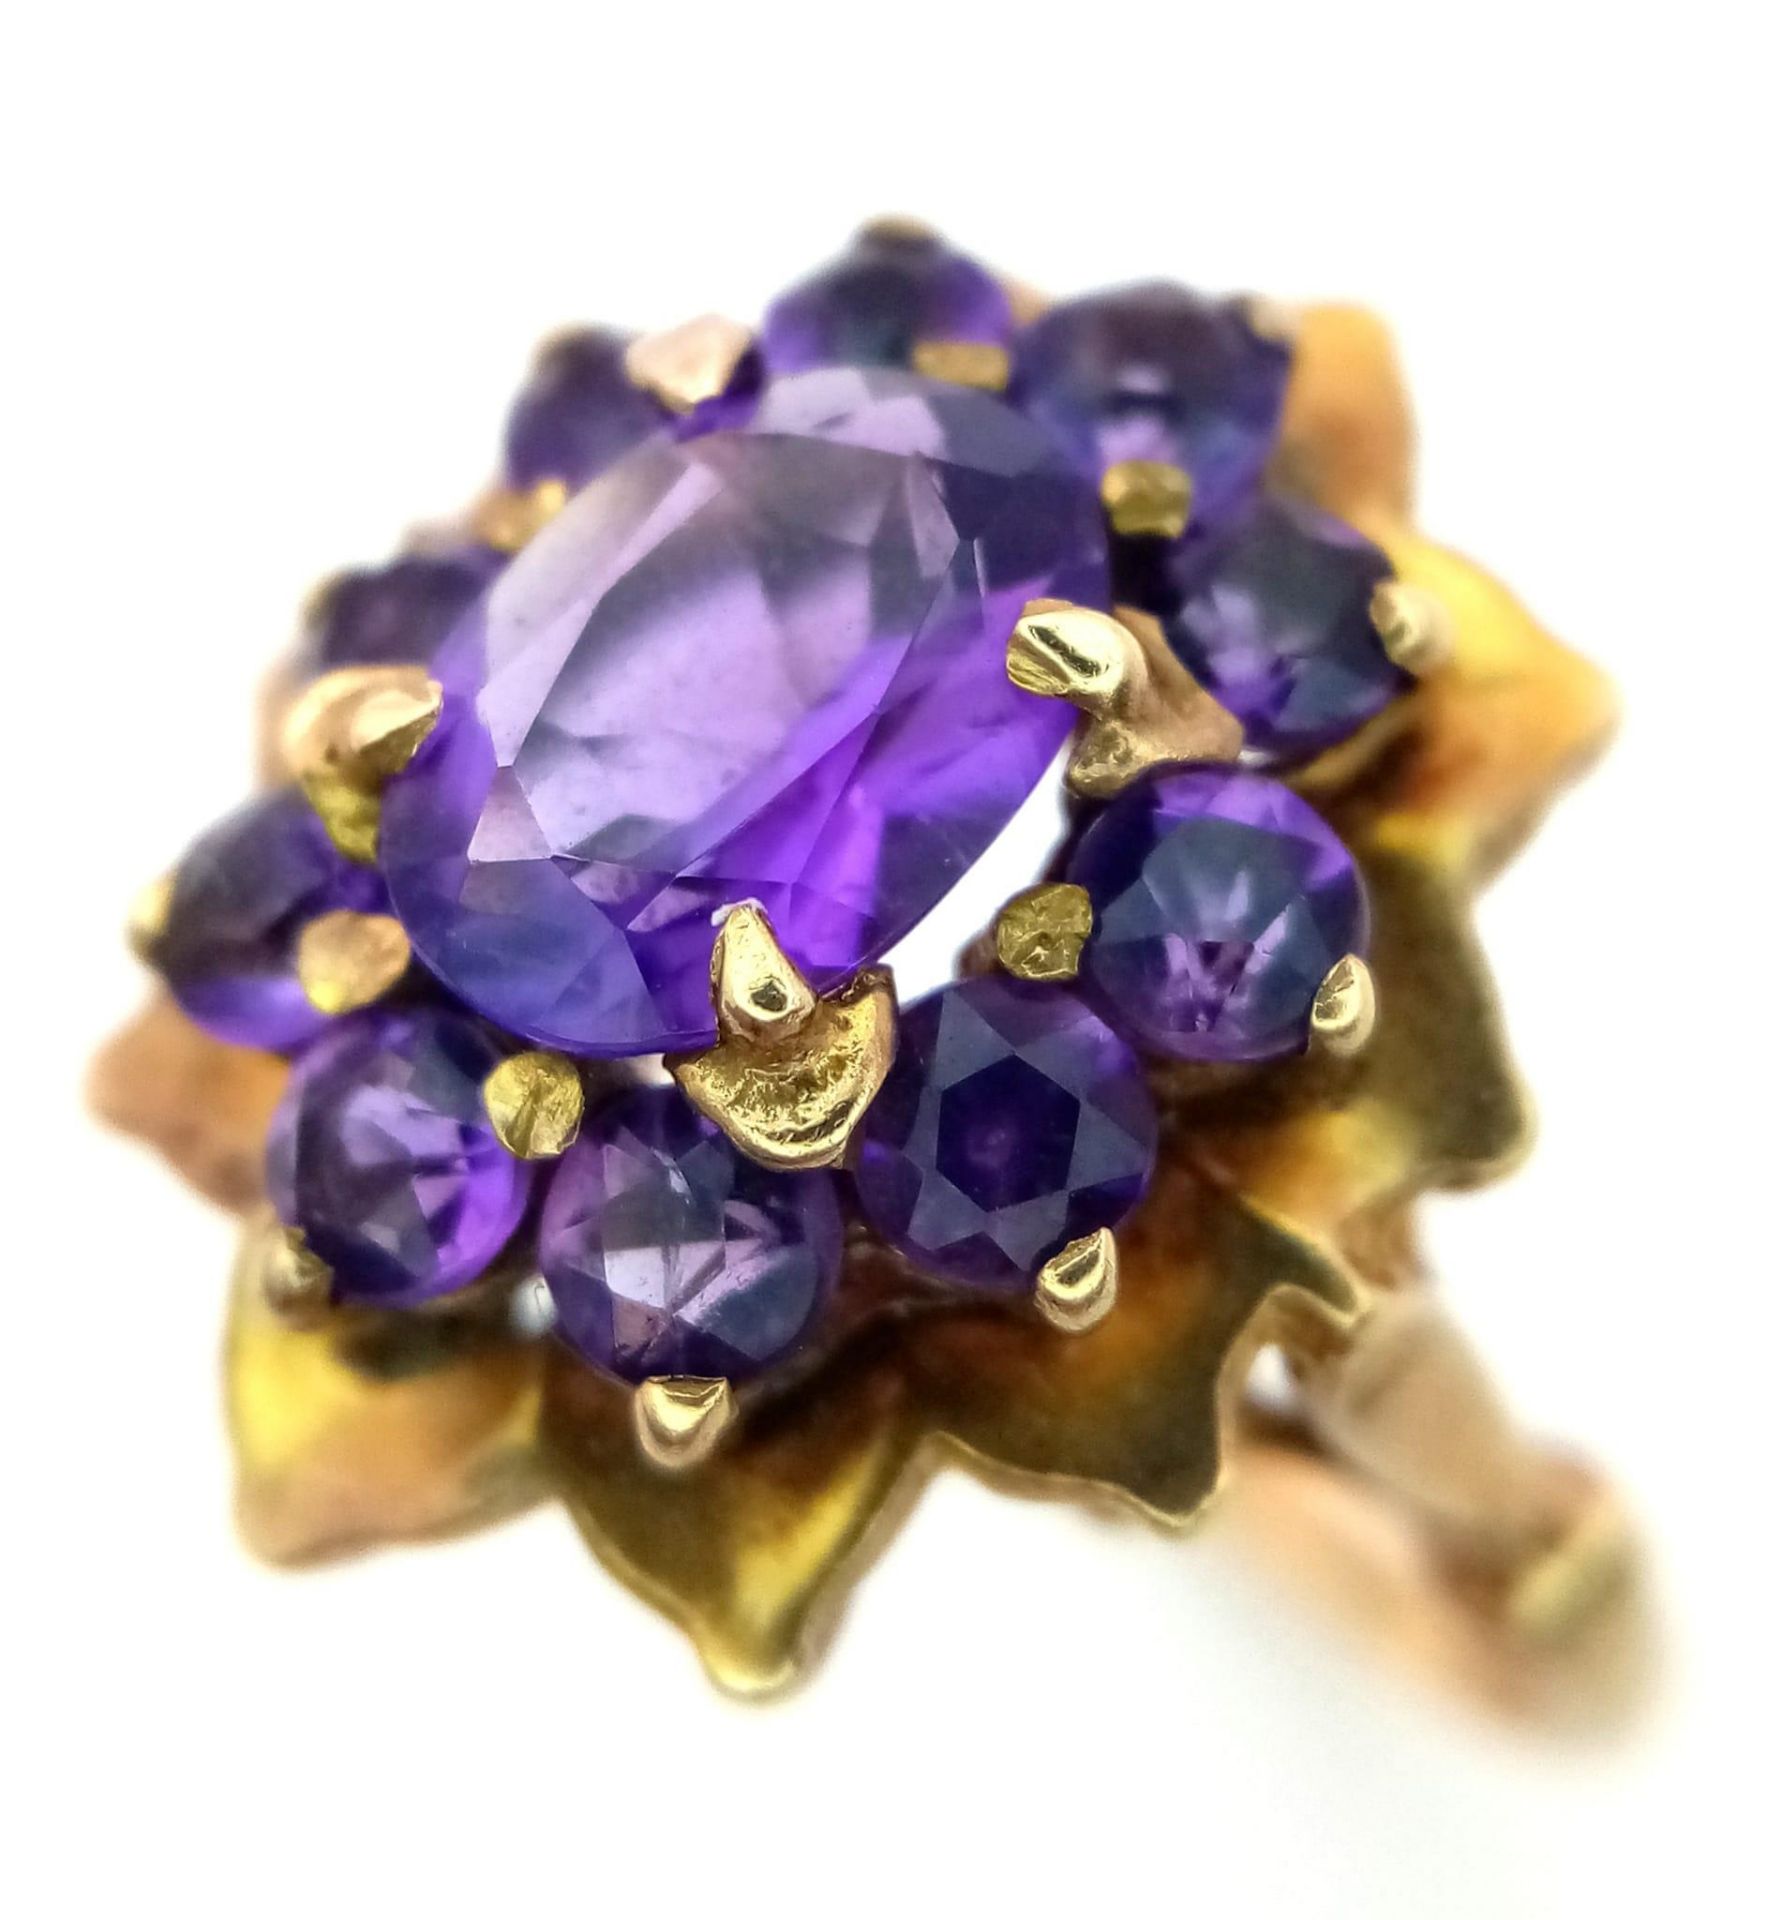 A Vintage 9K Yellow Gold Amethyst Ring. Central oval cut amethyst with an amethyst halo. Size M. 4.